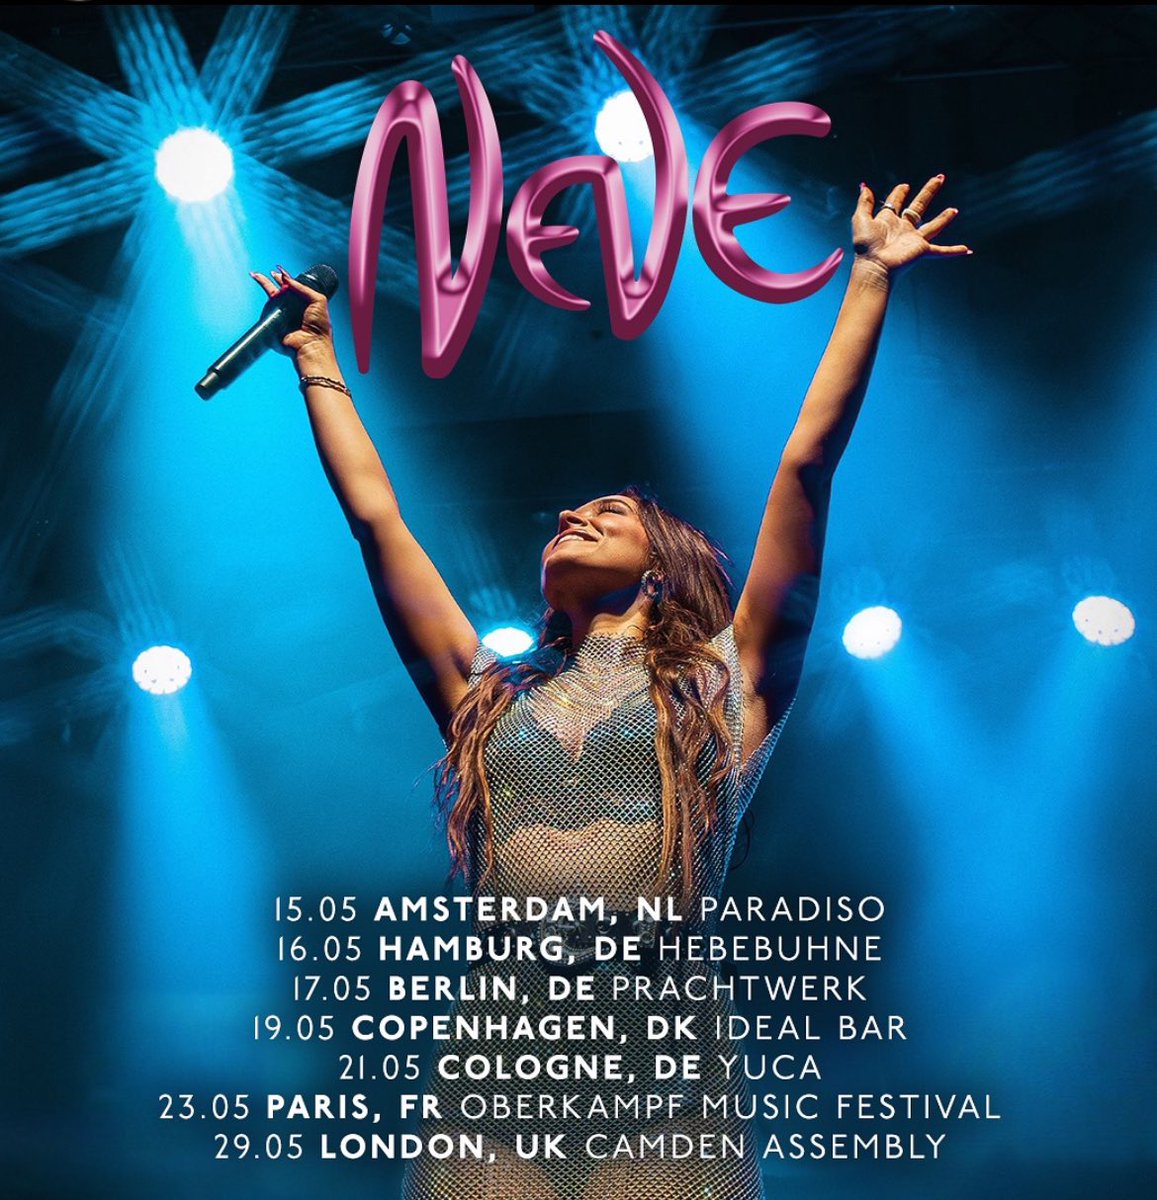 Got nothing to do in may? A good friend of mine is going on a lovely tour around europe, you def don’t wanna miss out on‼️ You can buy tickets through this link: neve.os.fan/tour-tickets-o… Hope to see you there🤍